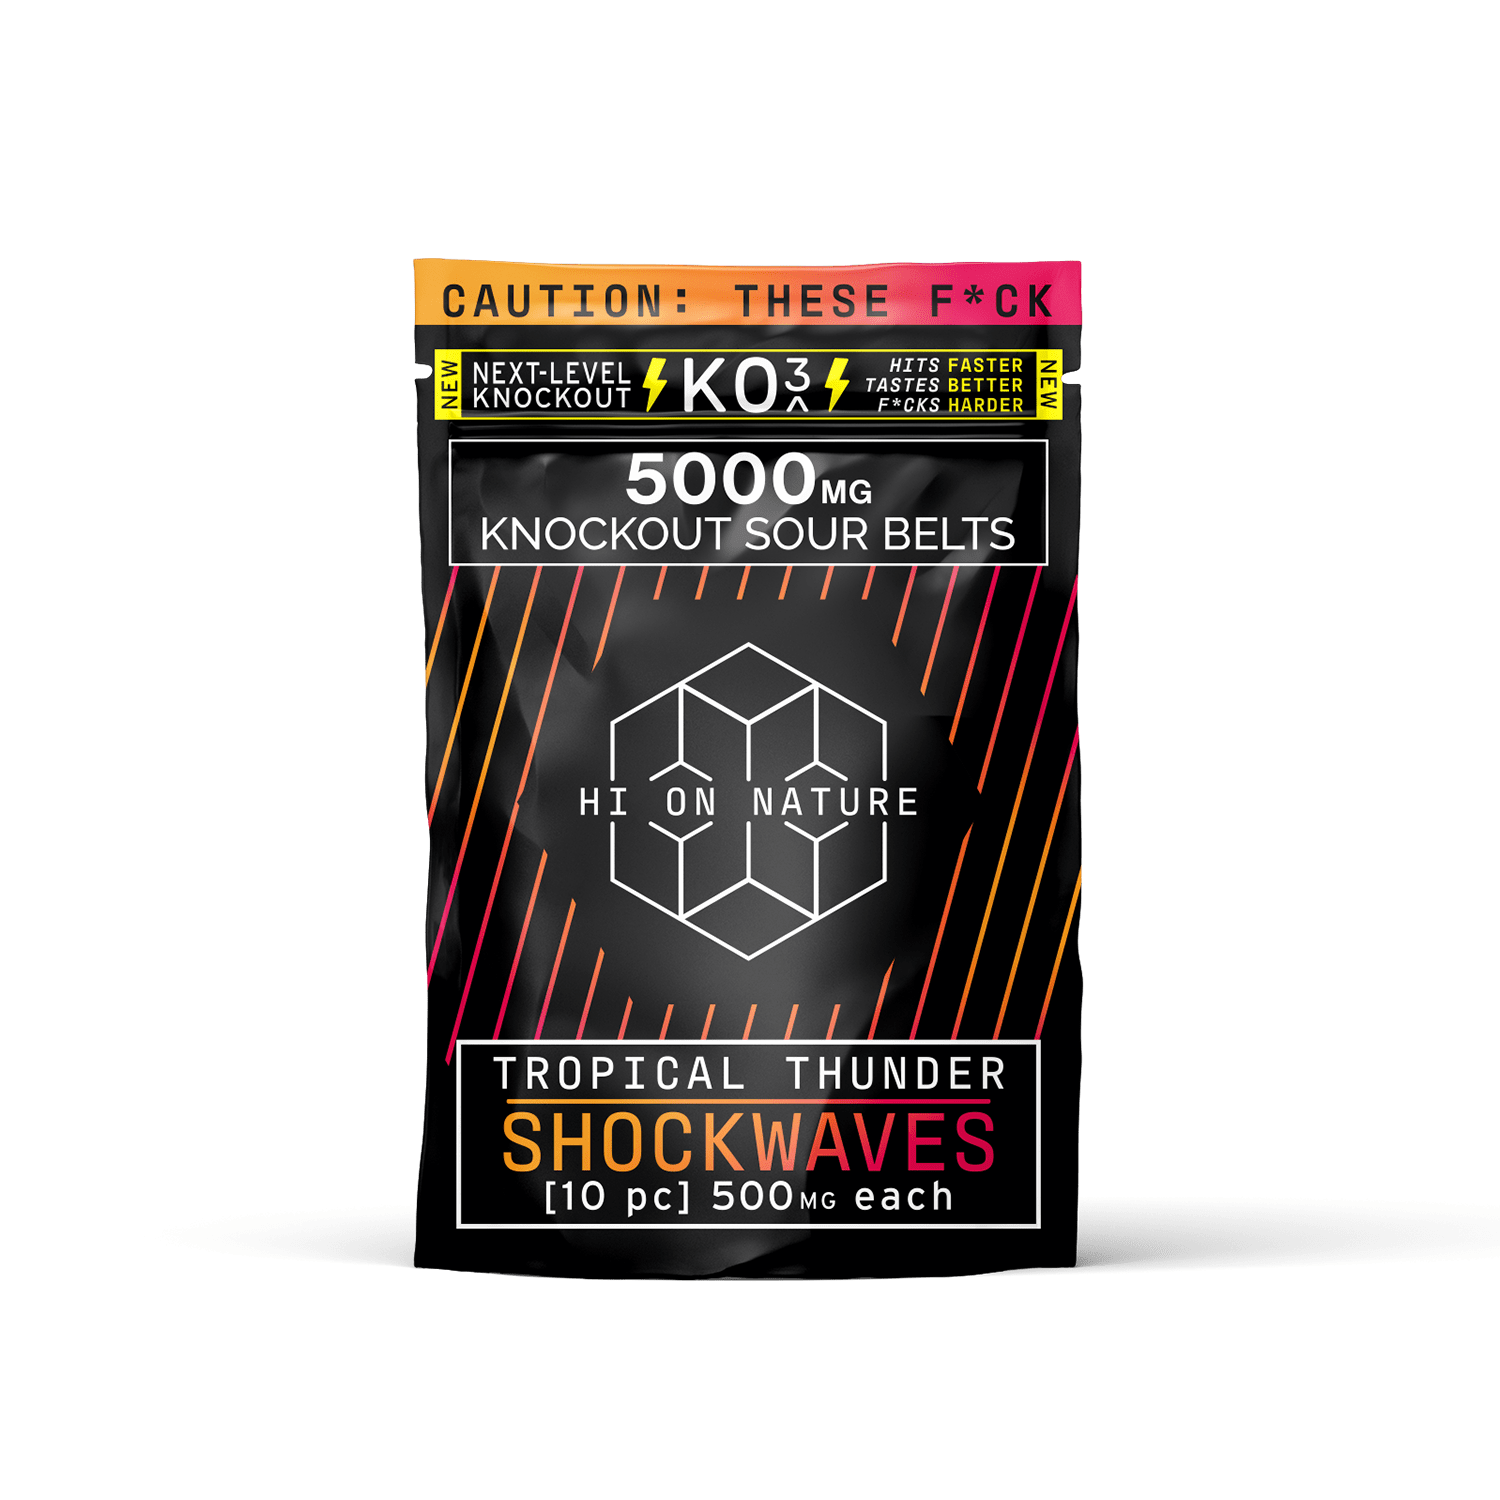 5000mg KNOCKOUT SHOCKWAVES - TROPICAL THUNDER Best Price